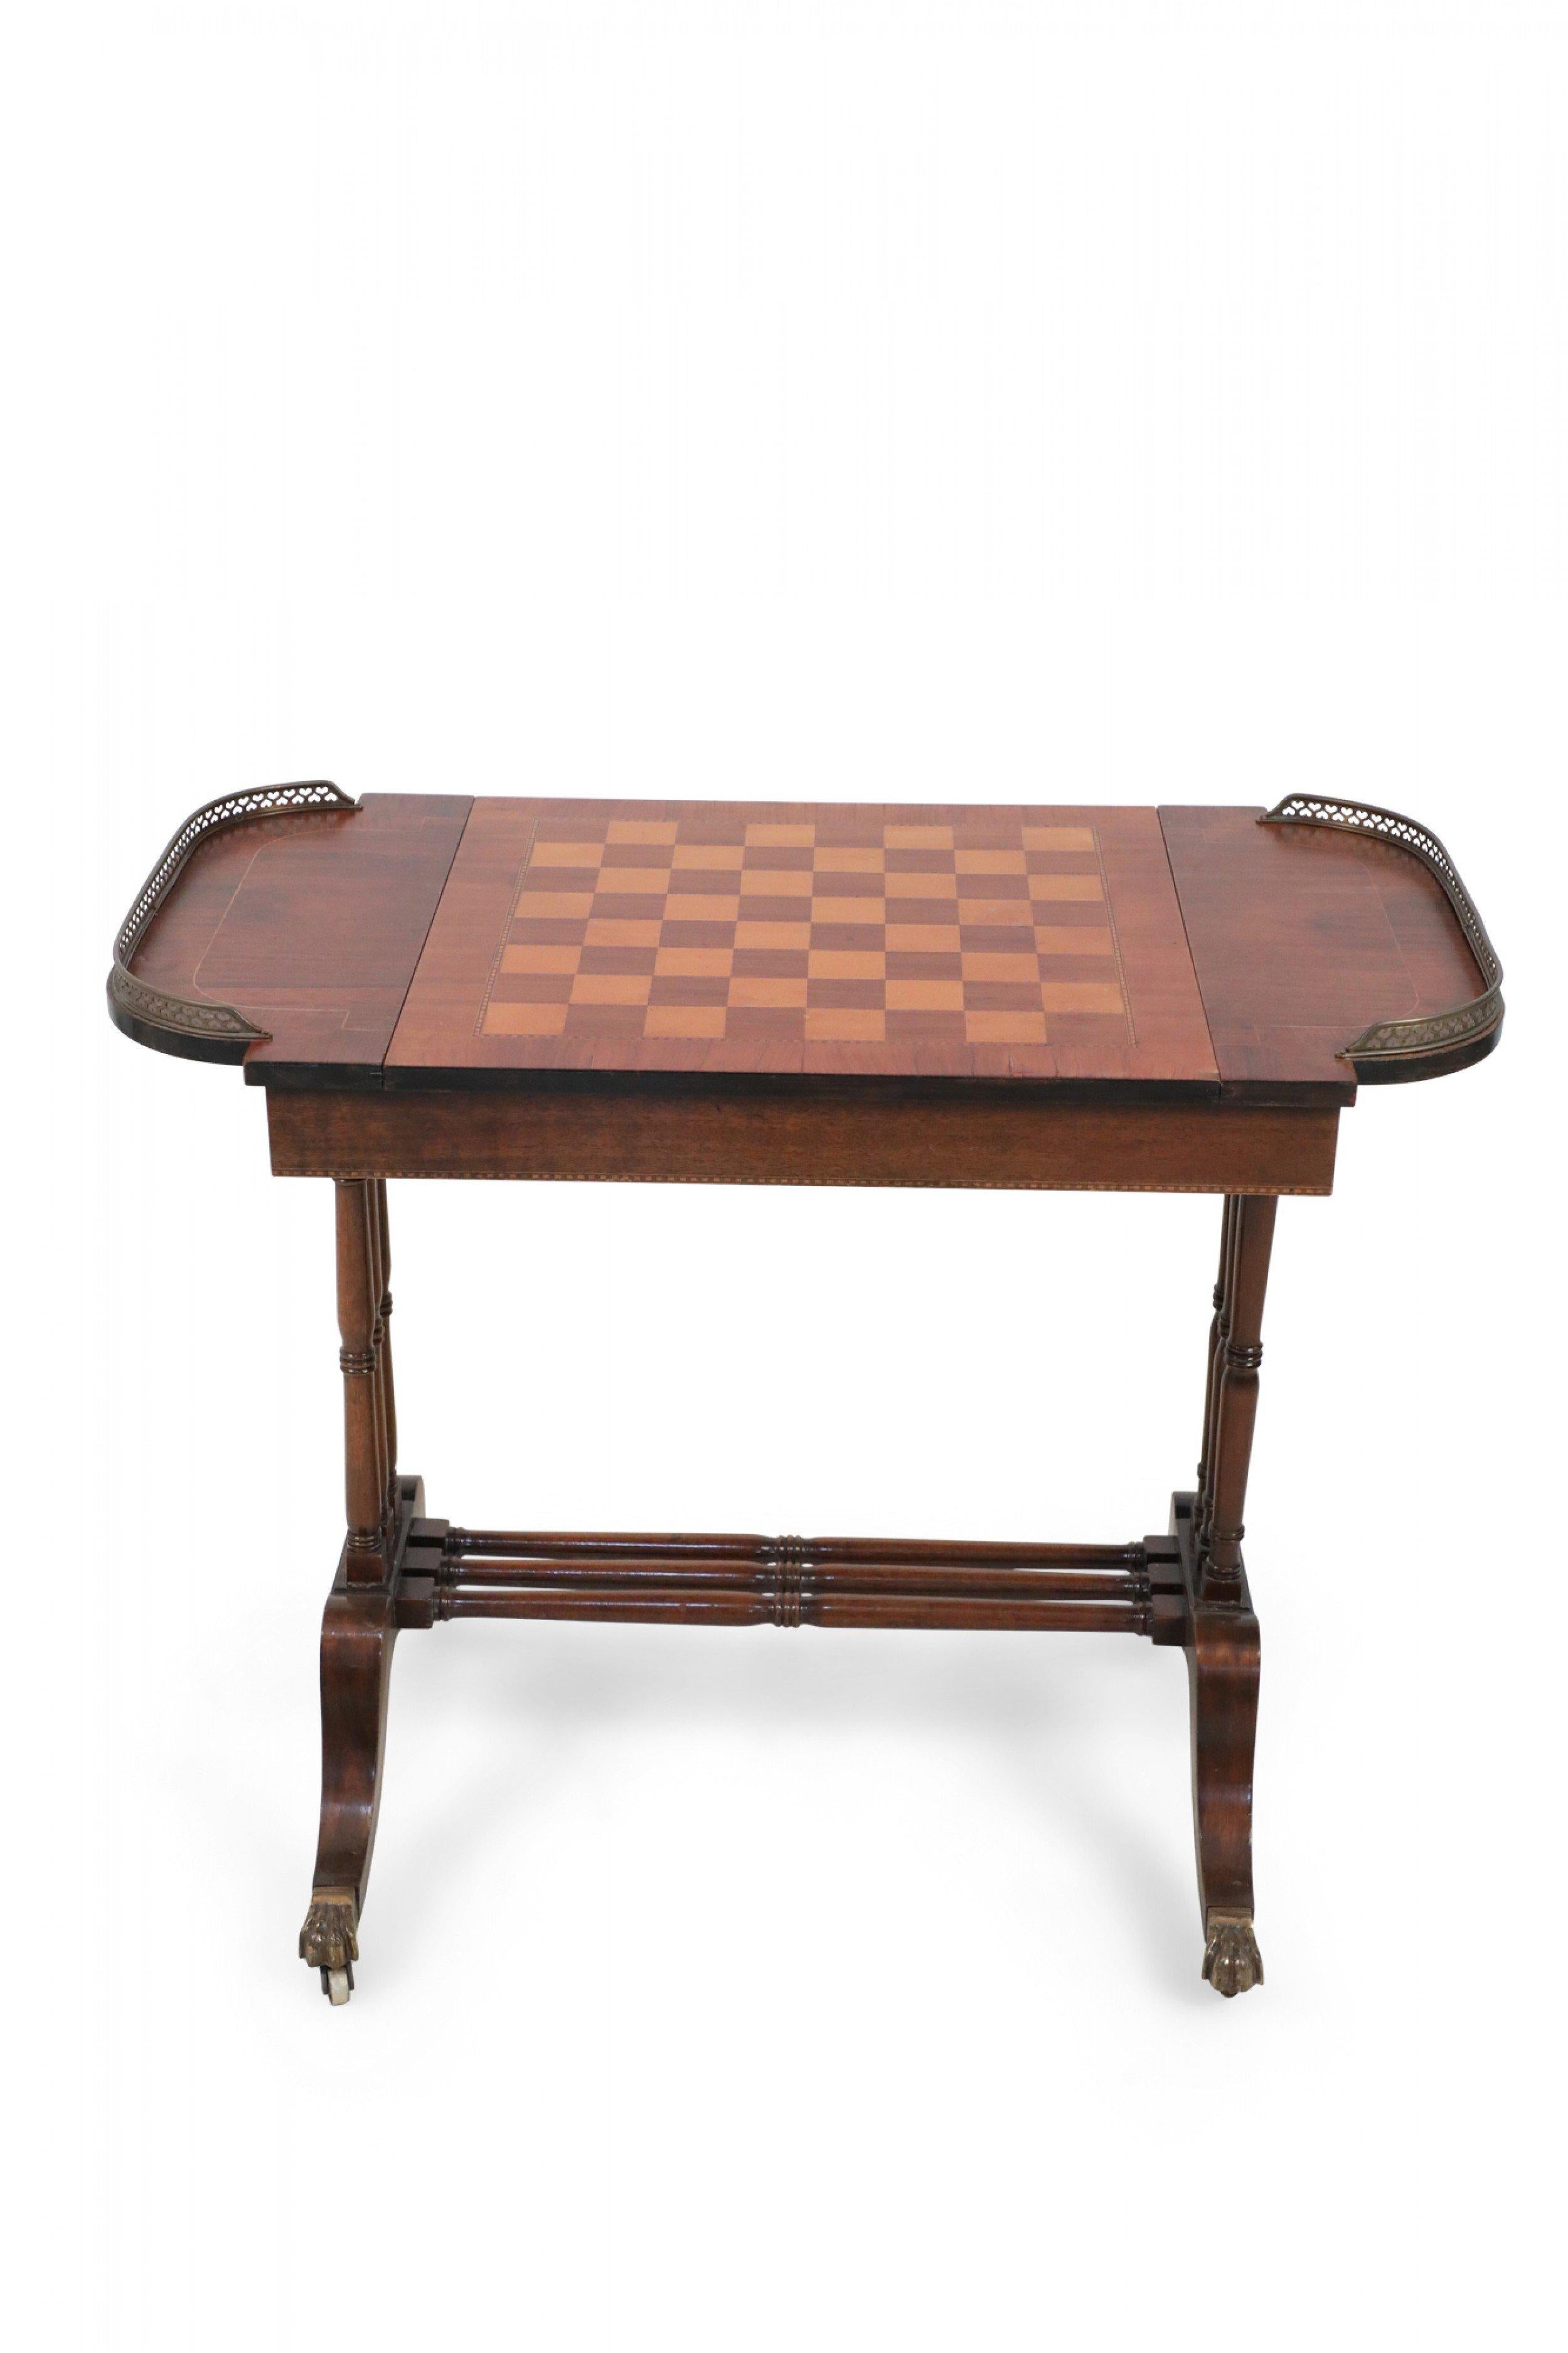 English Regency Style Wooden Game Table For Sale 6